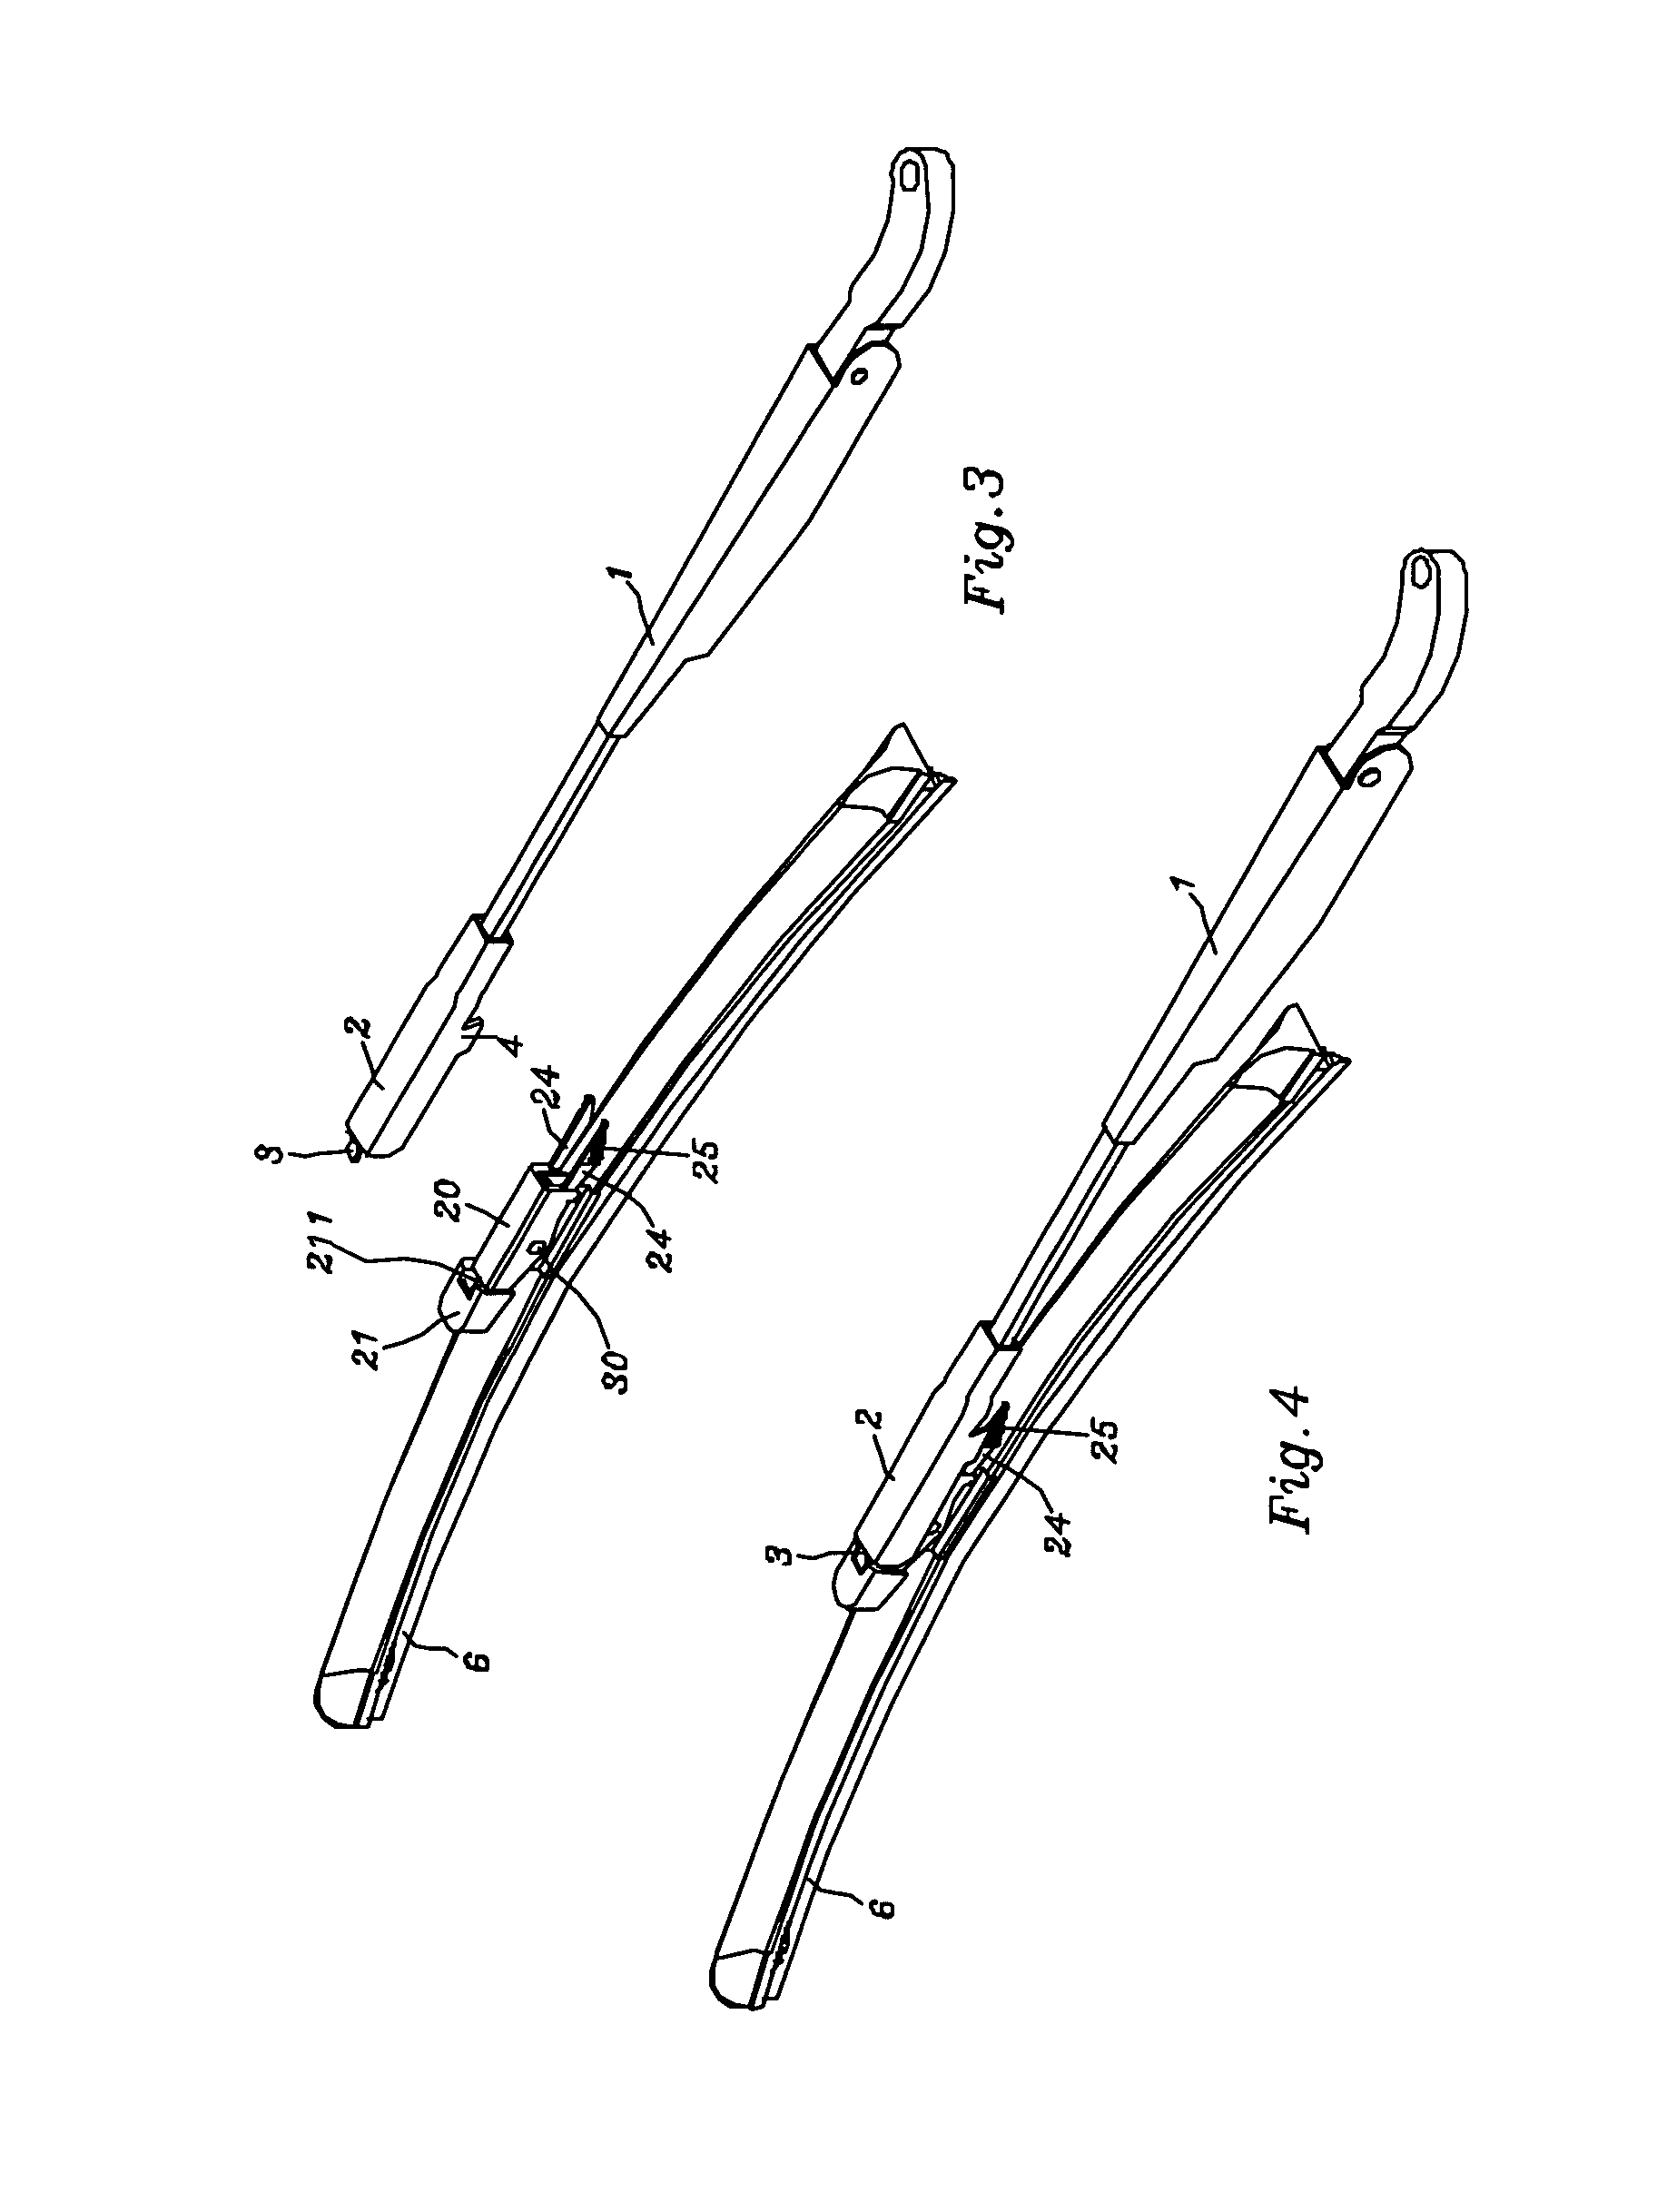 Joint device for wiper arm of car windshield